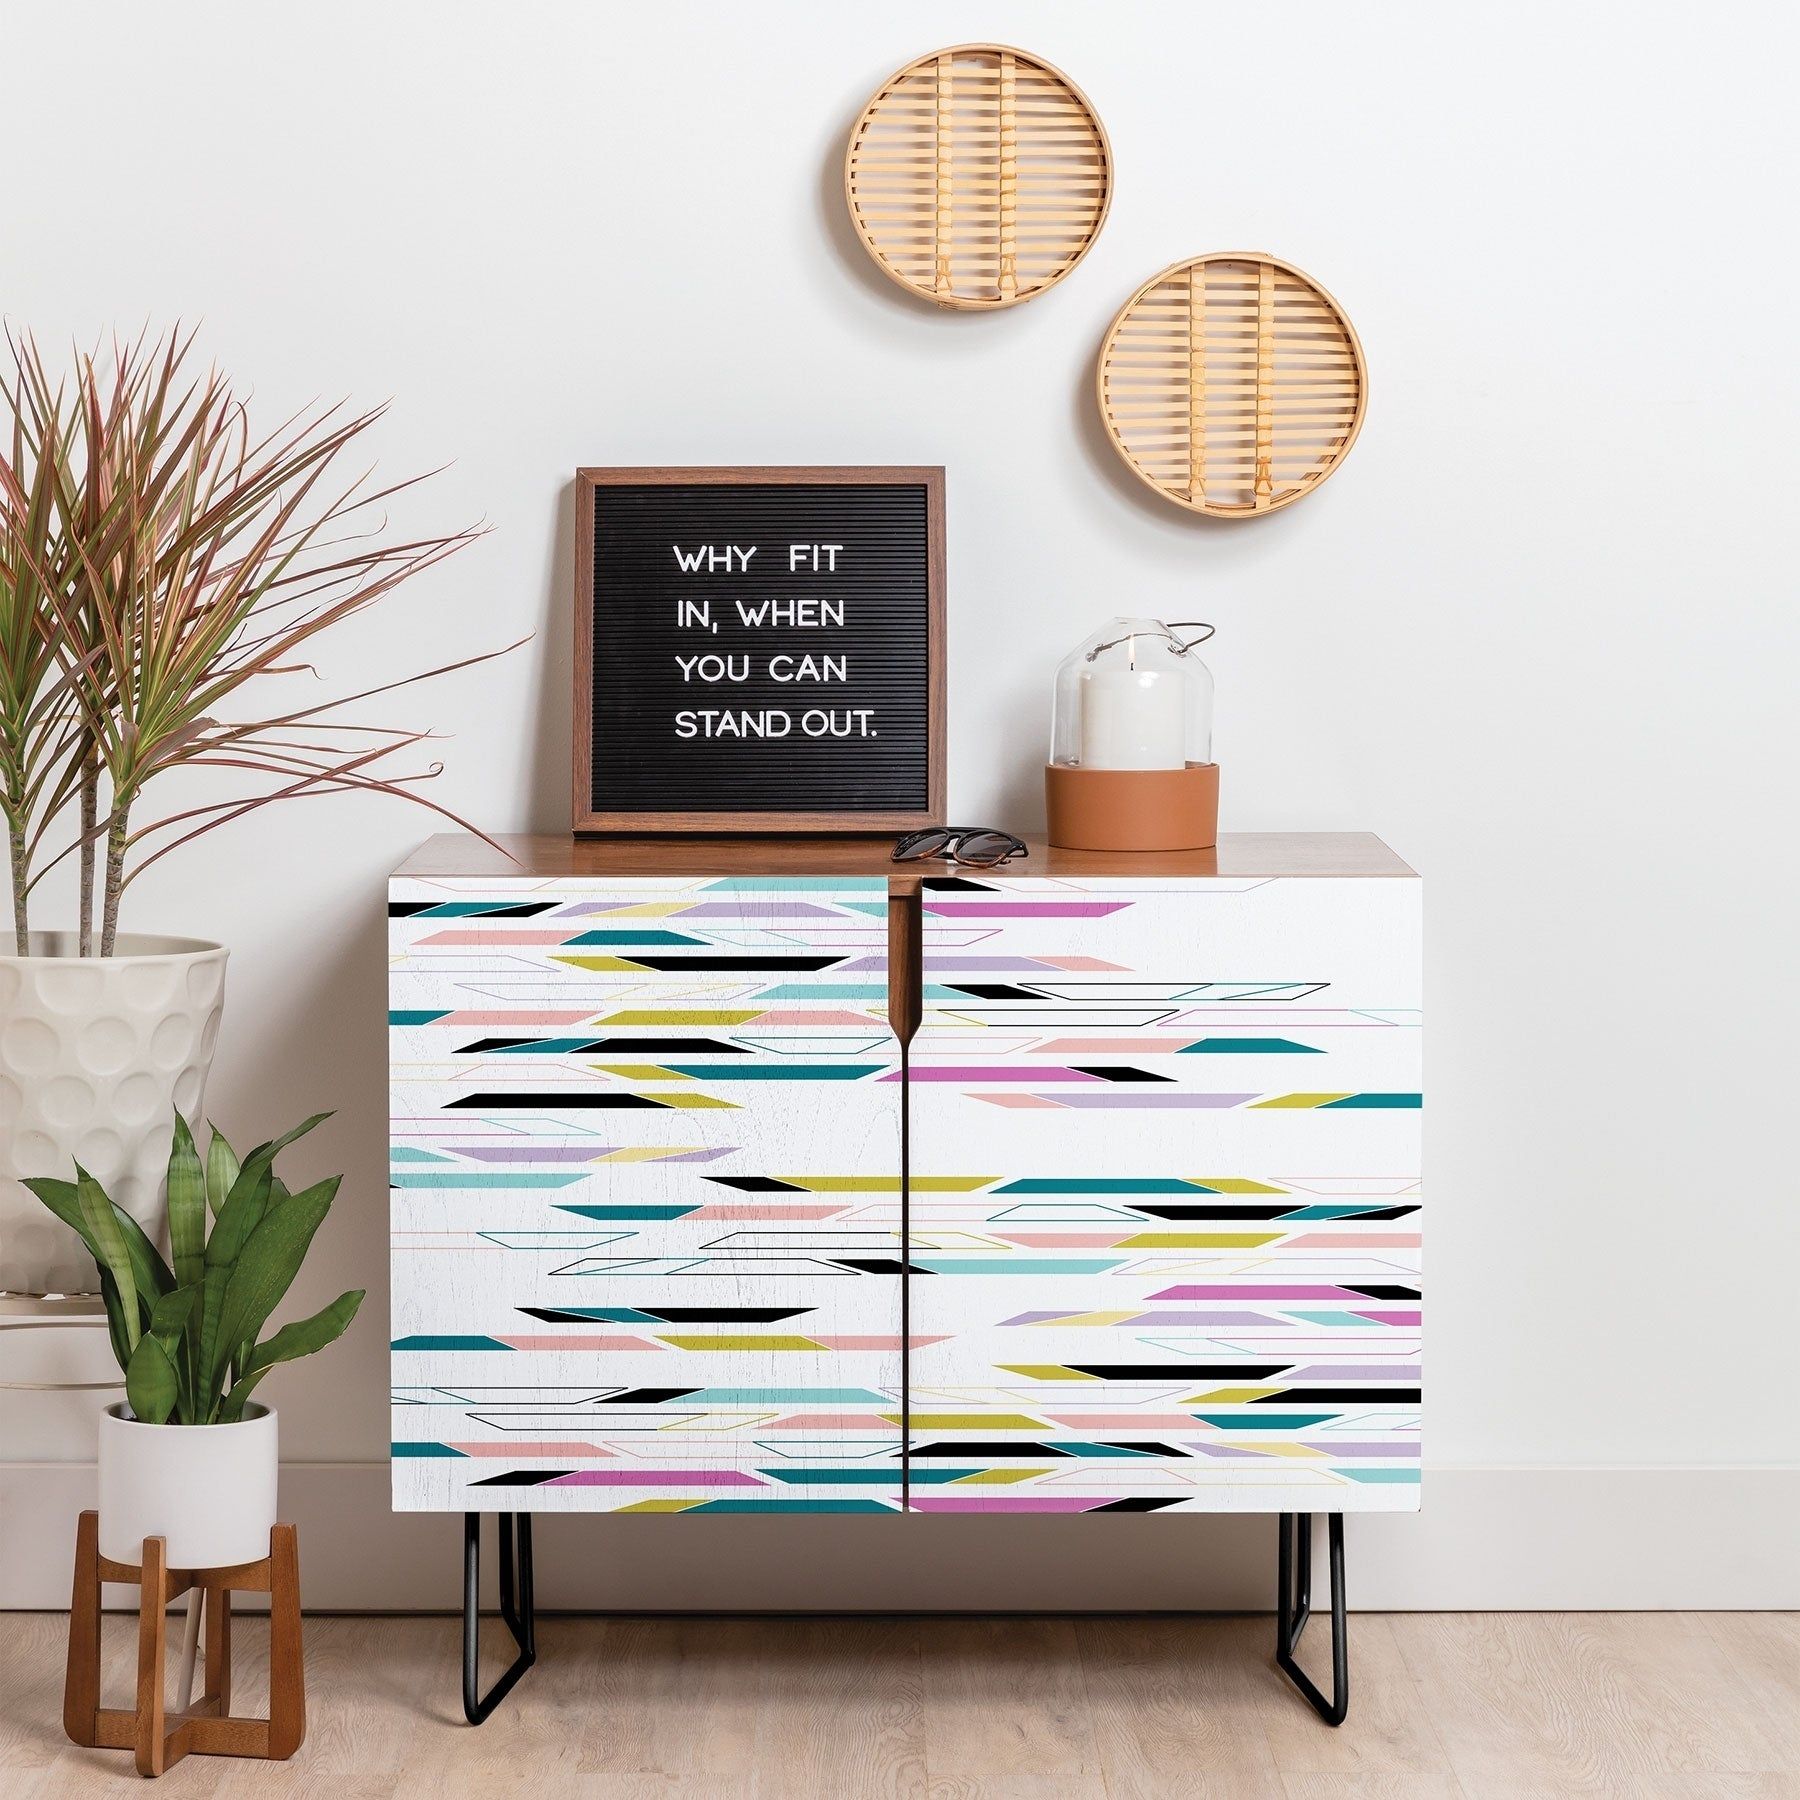 Deny Designs Multi Colored Geometric Shapes Credenza (birch Or Walnut, 3  Leg Options) Within Multi Colored Geometric Shapes Credenzas (View 1 of 30)